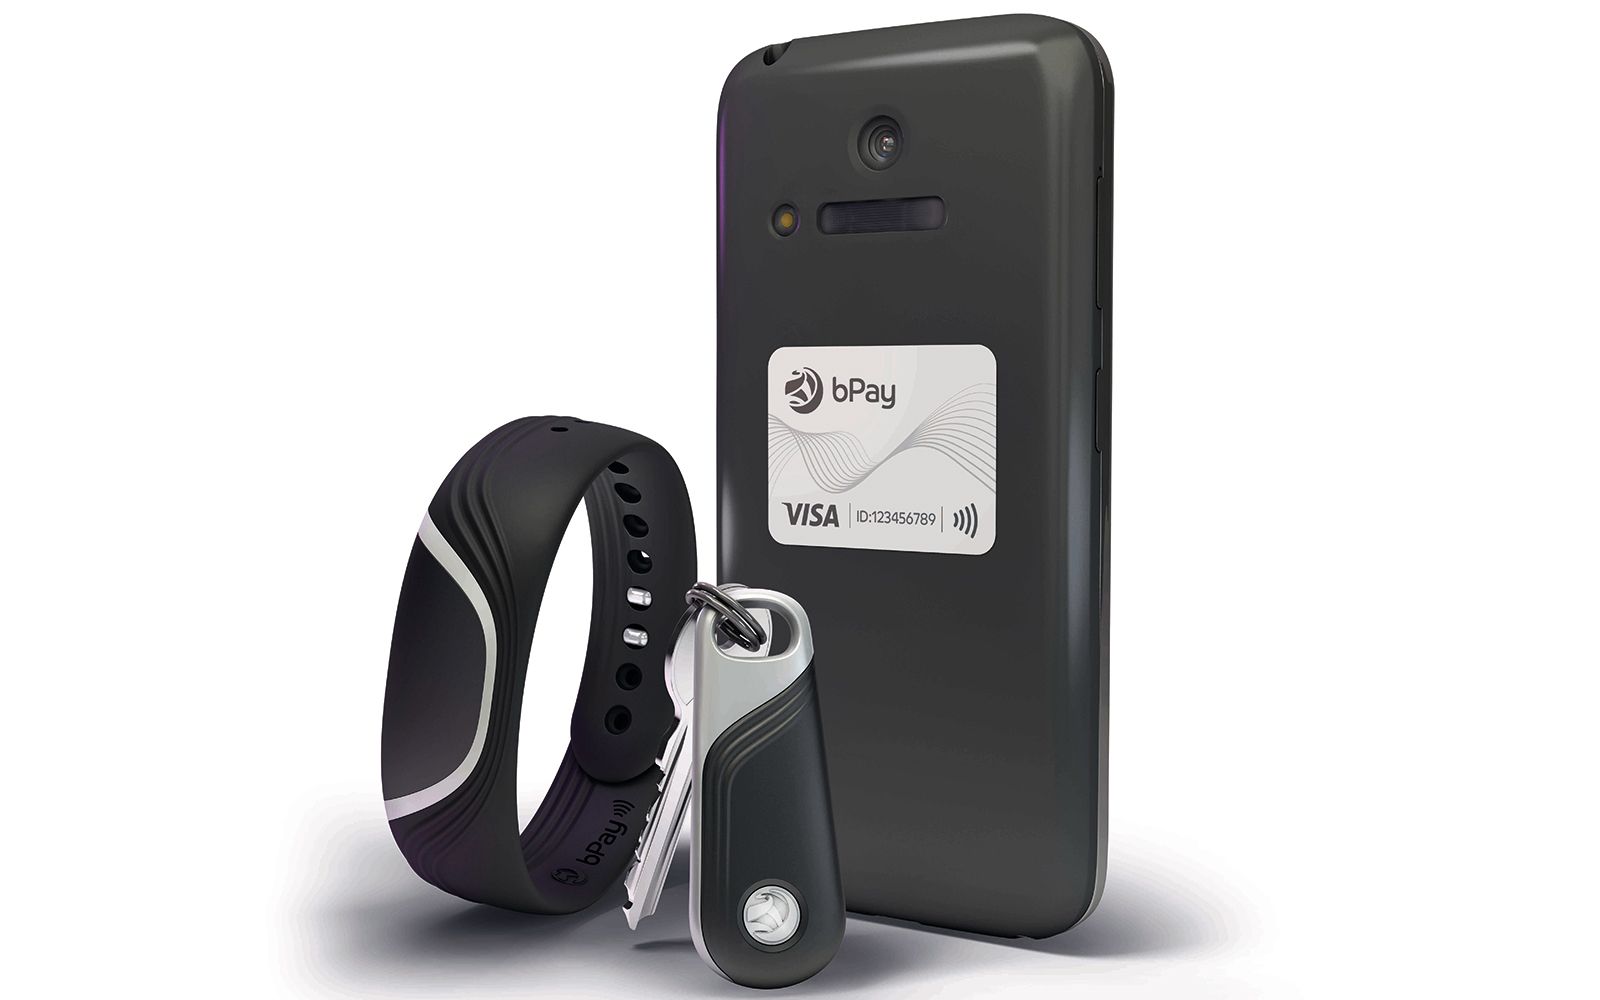 tap to pay from any bank using bpay wristband fob or sticker image 1